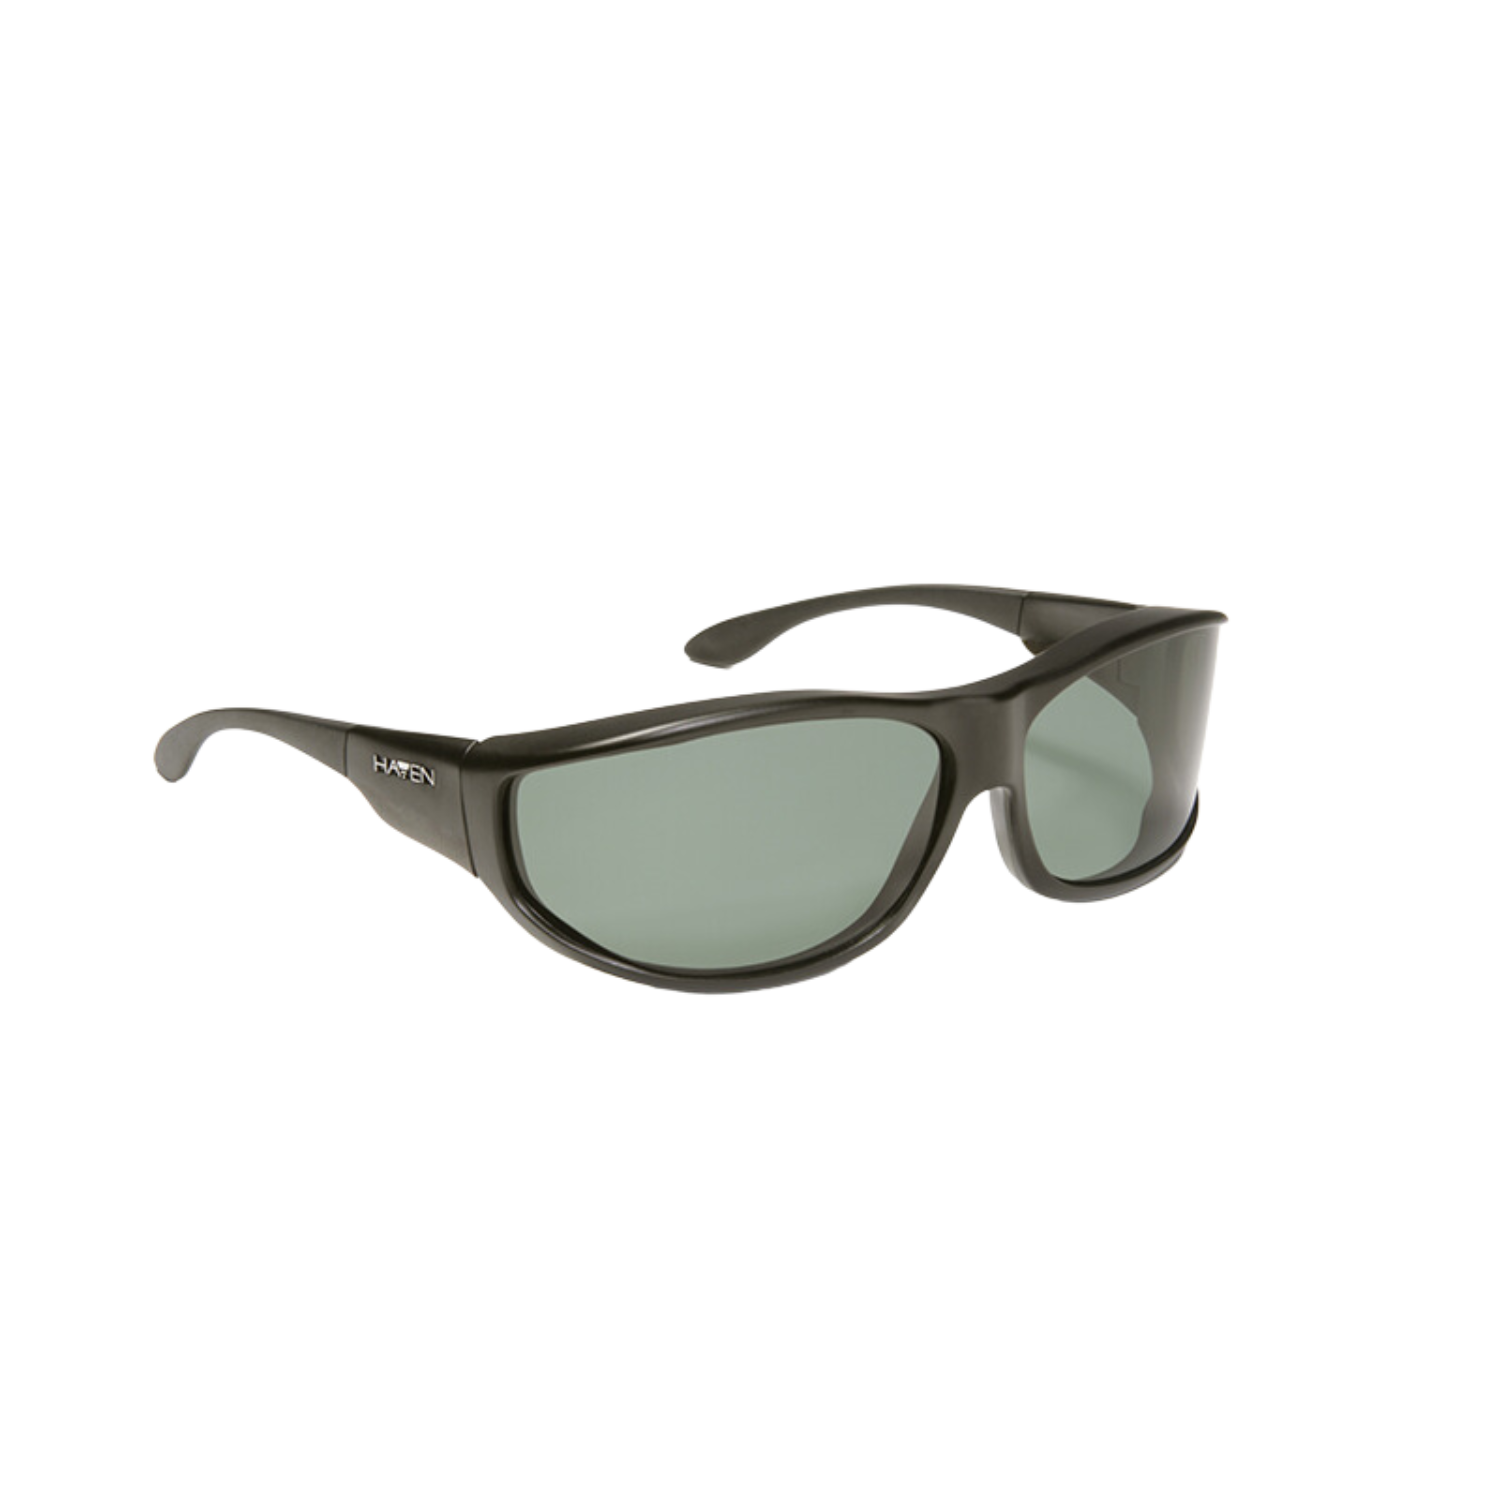 Image of the Haven Malloy polarized fit-over sunglasses with black frames and gray tint.